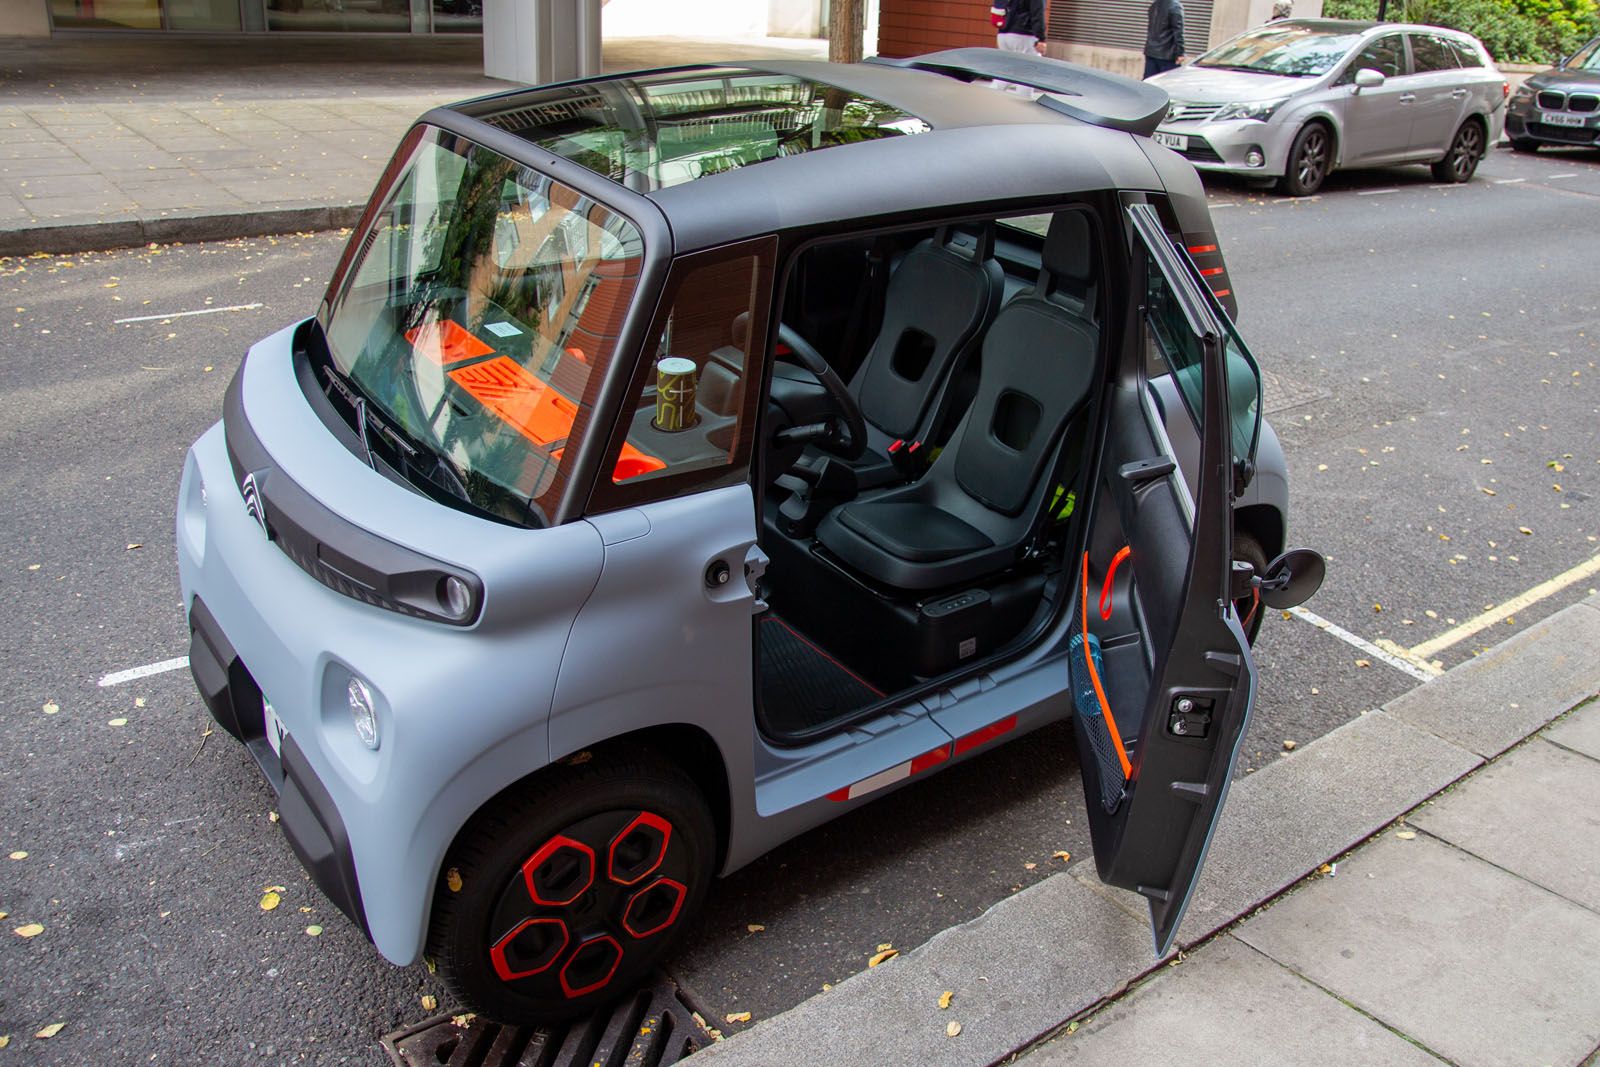 Citroën Ami review: The future of urban motoring?